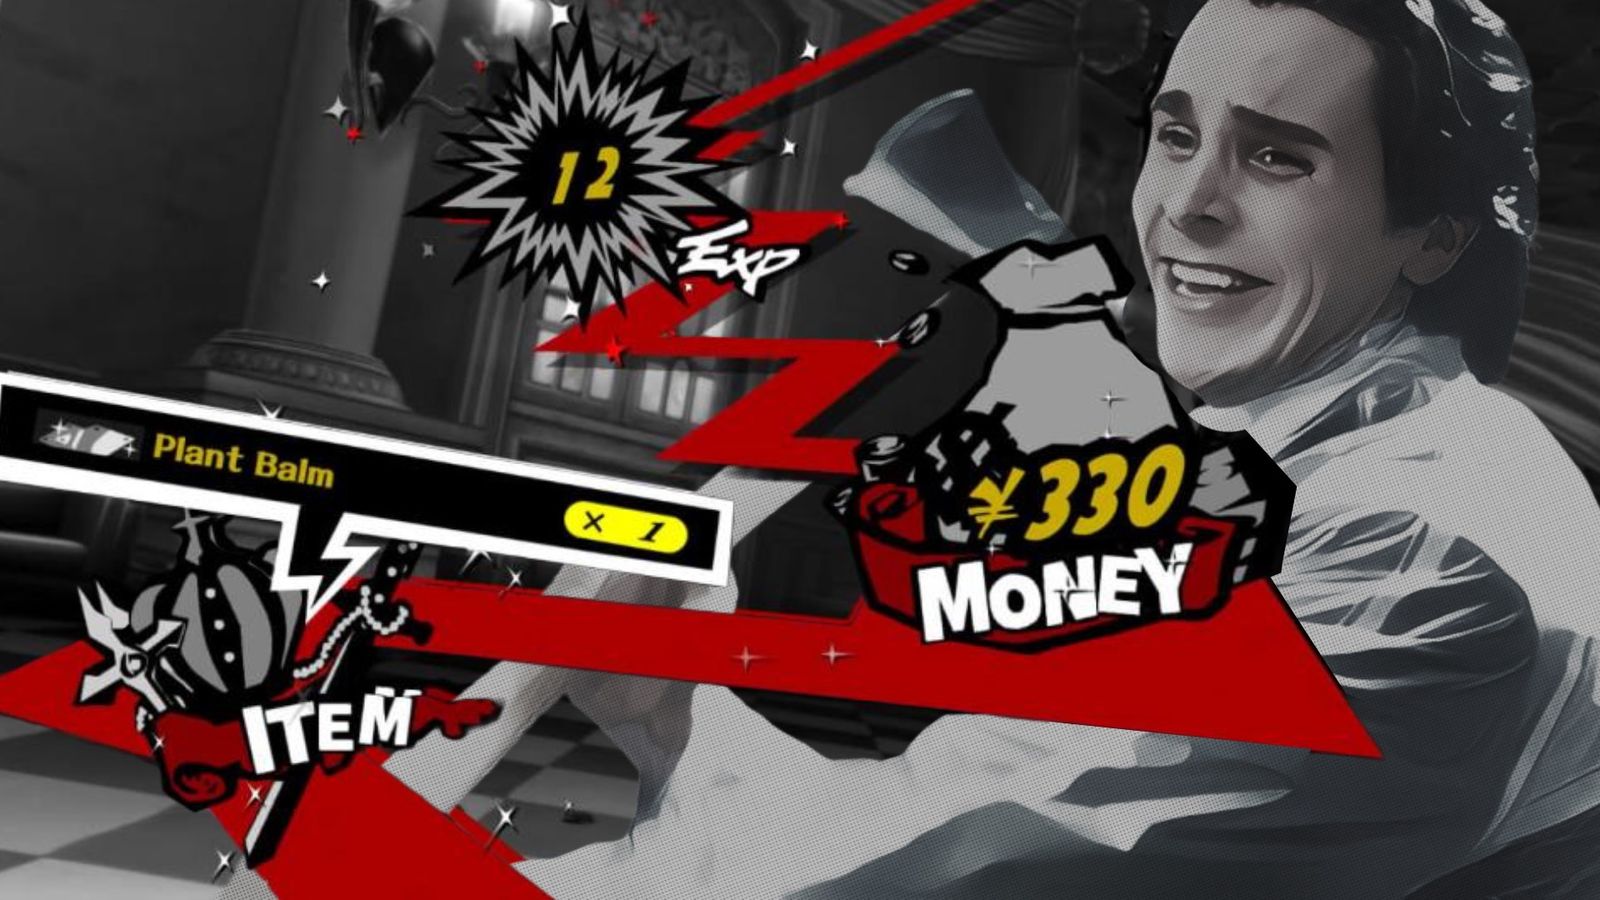 Patrick Bateman in the Persona 5 victory screen after a battle. 